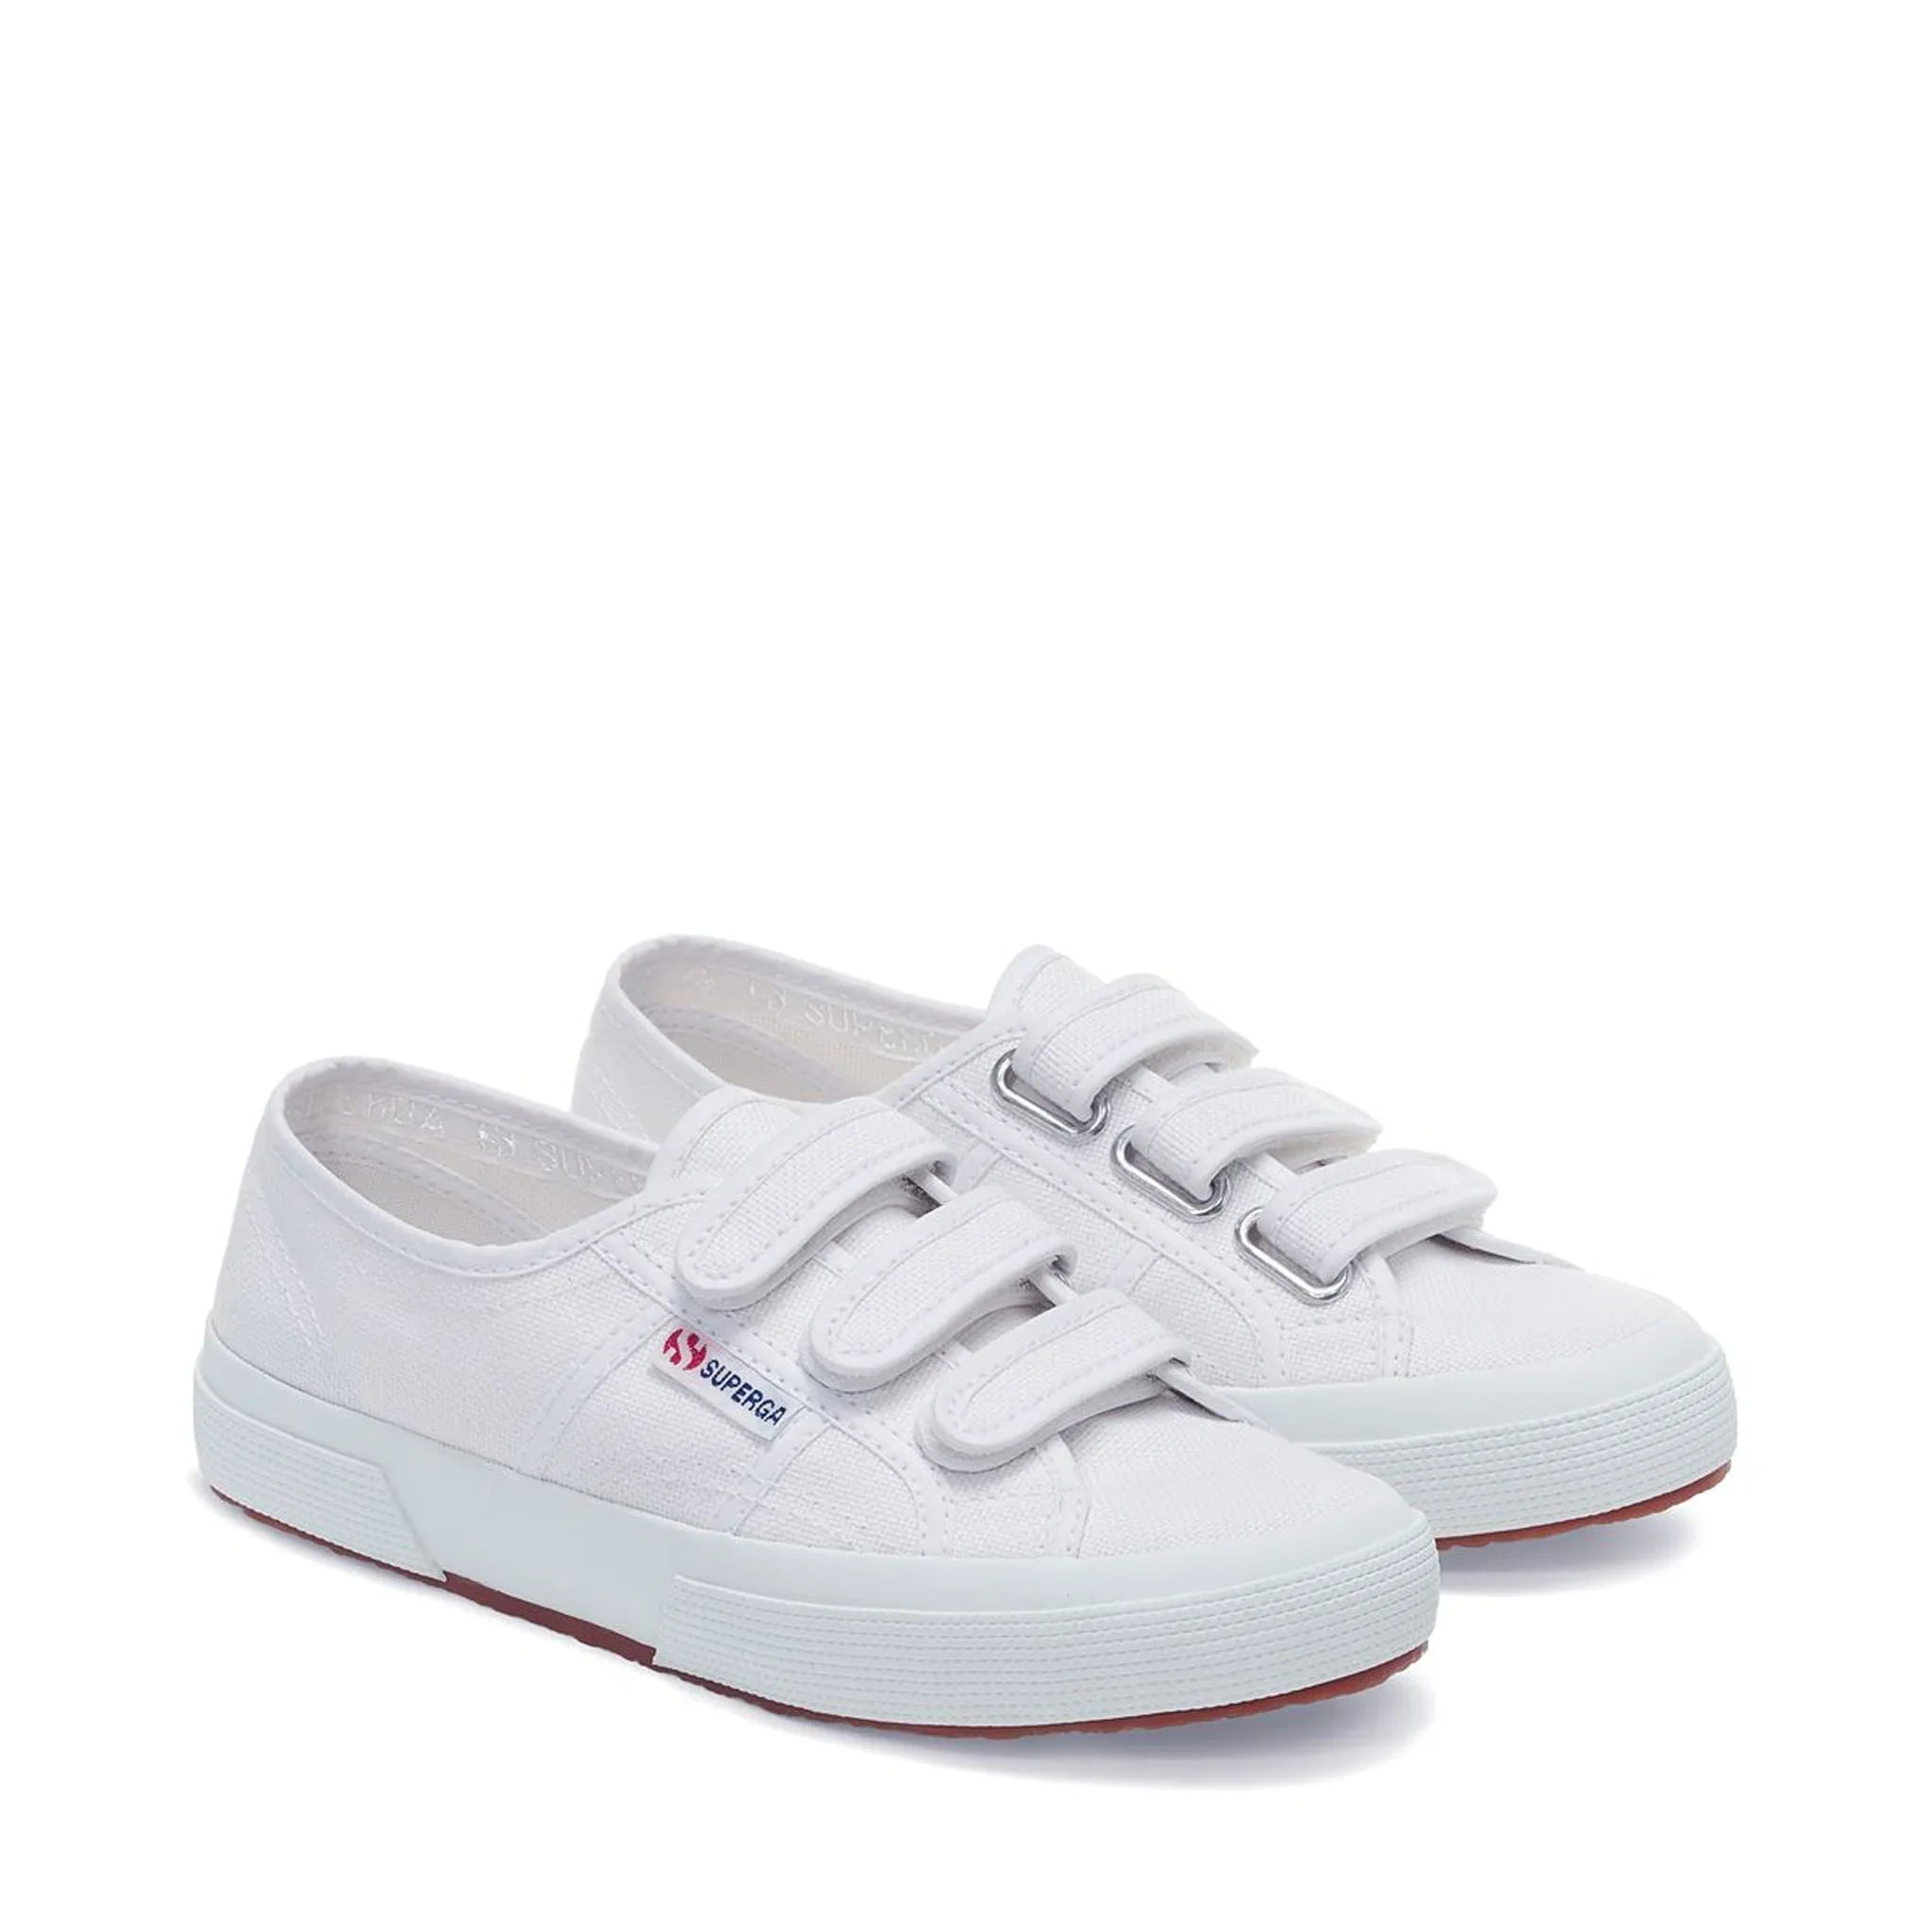 Superga 2750 Cot3Strapu Sneakers - White. Front view.